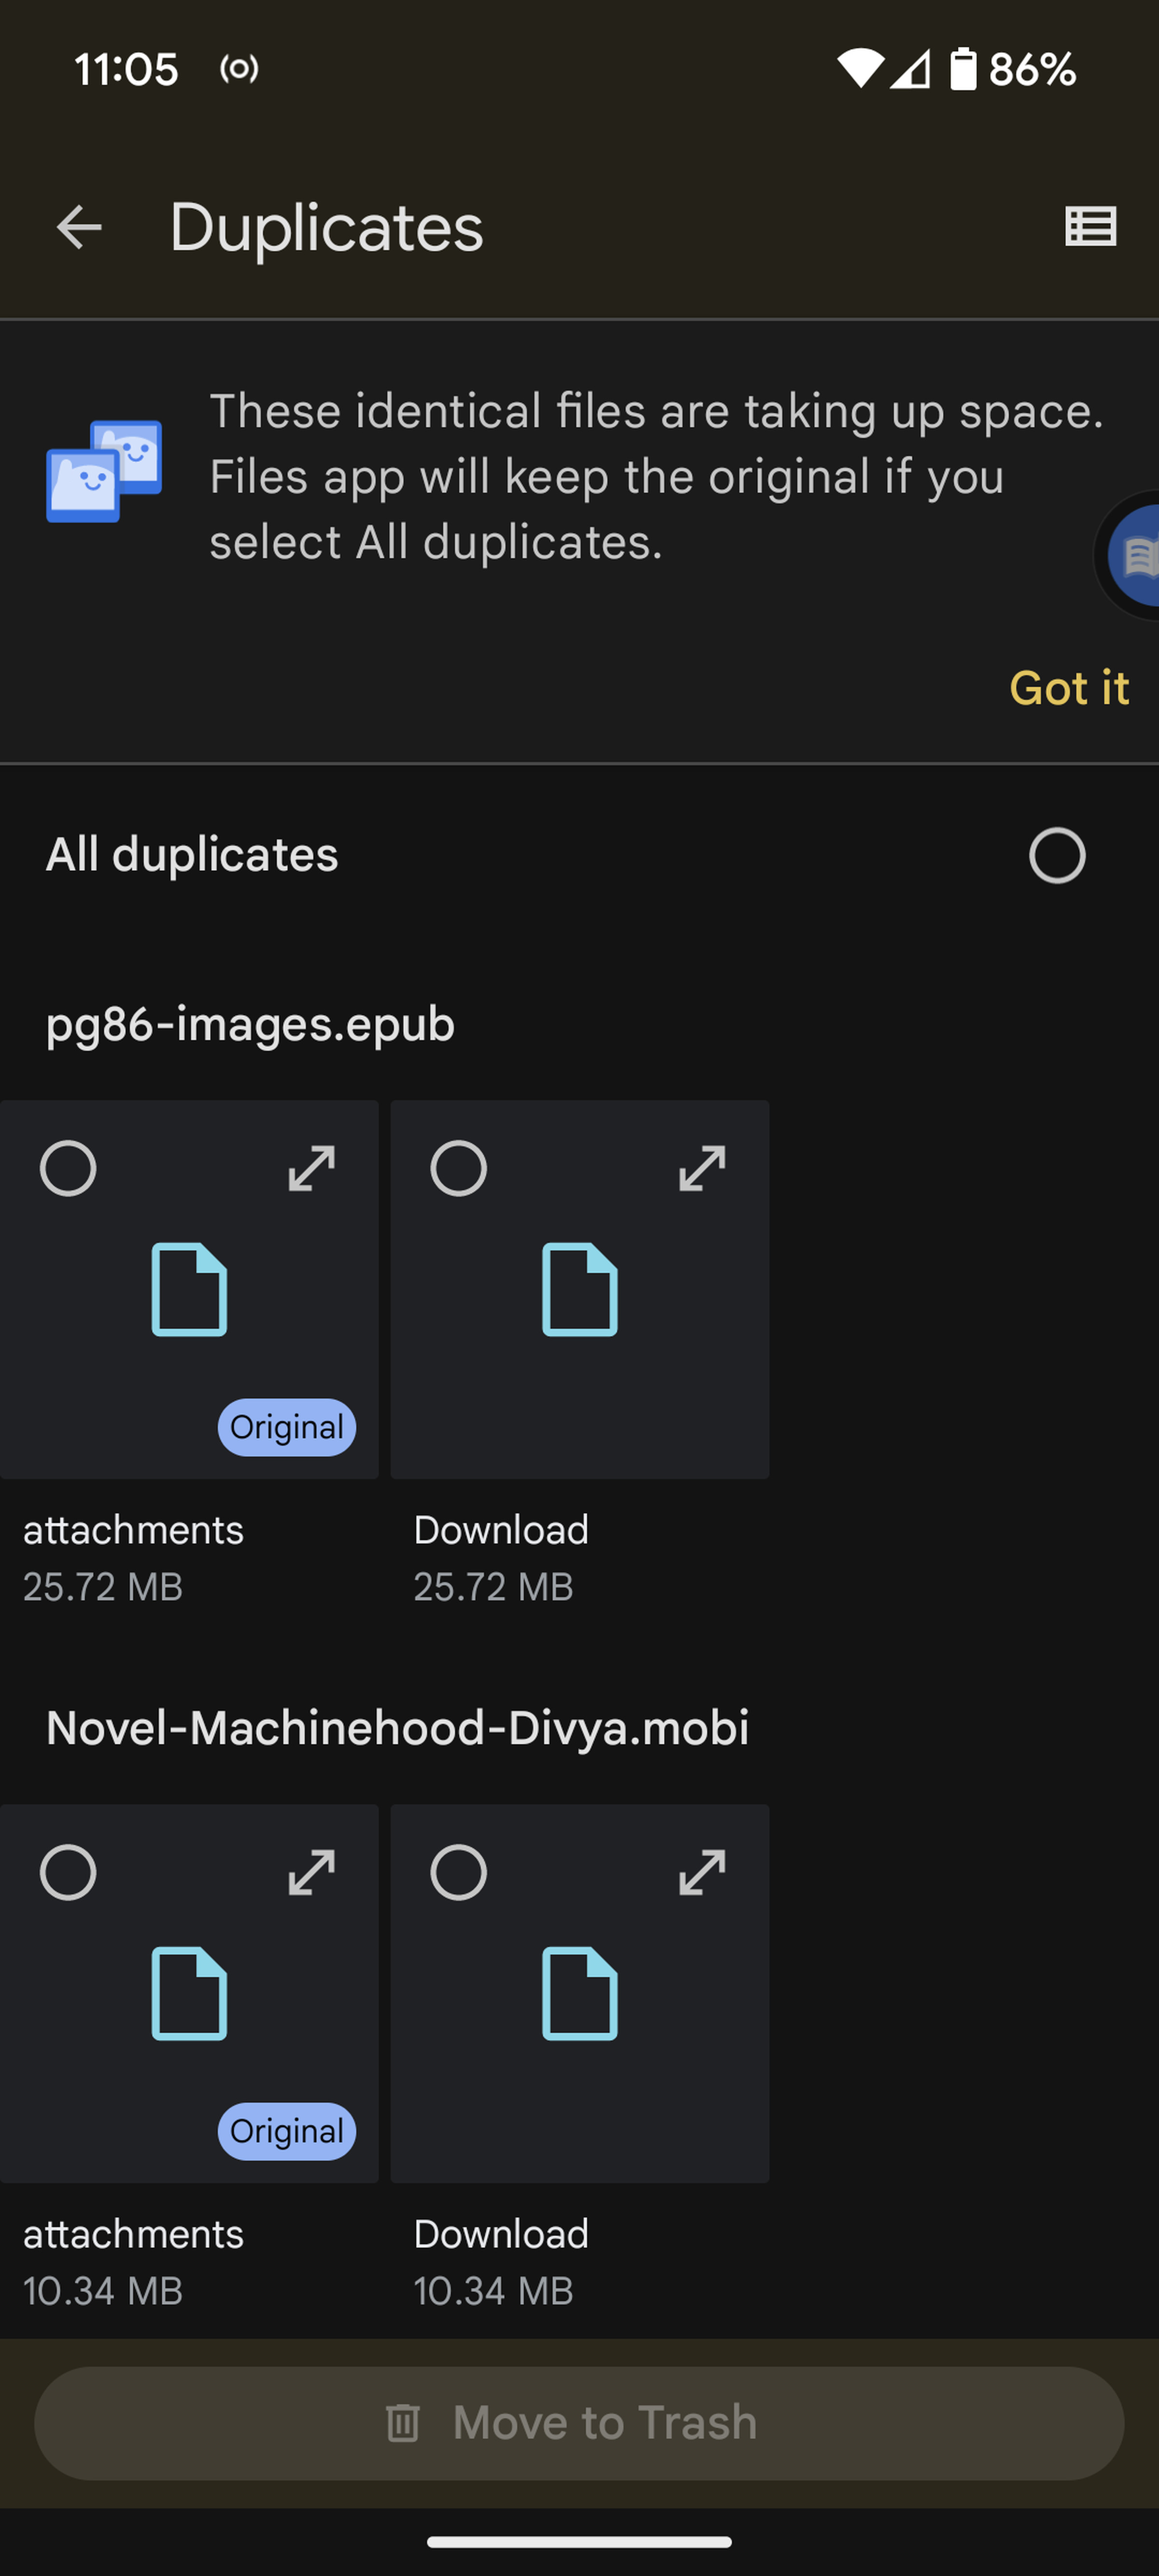 Mobile screen with Duplicates on top, and several examples of duplicate files below.